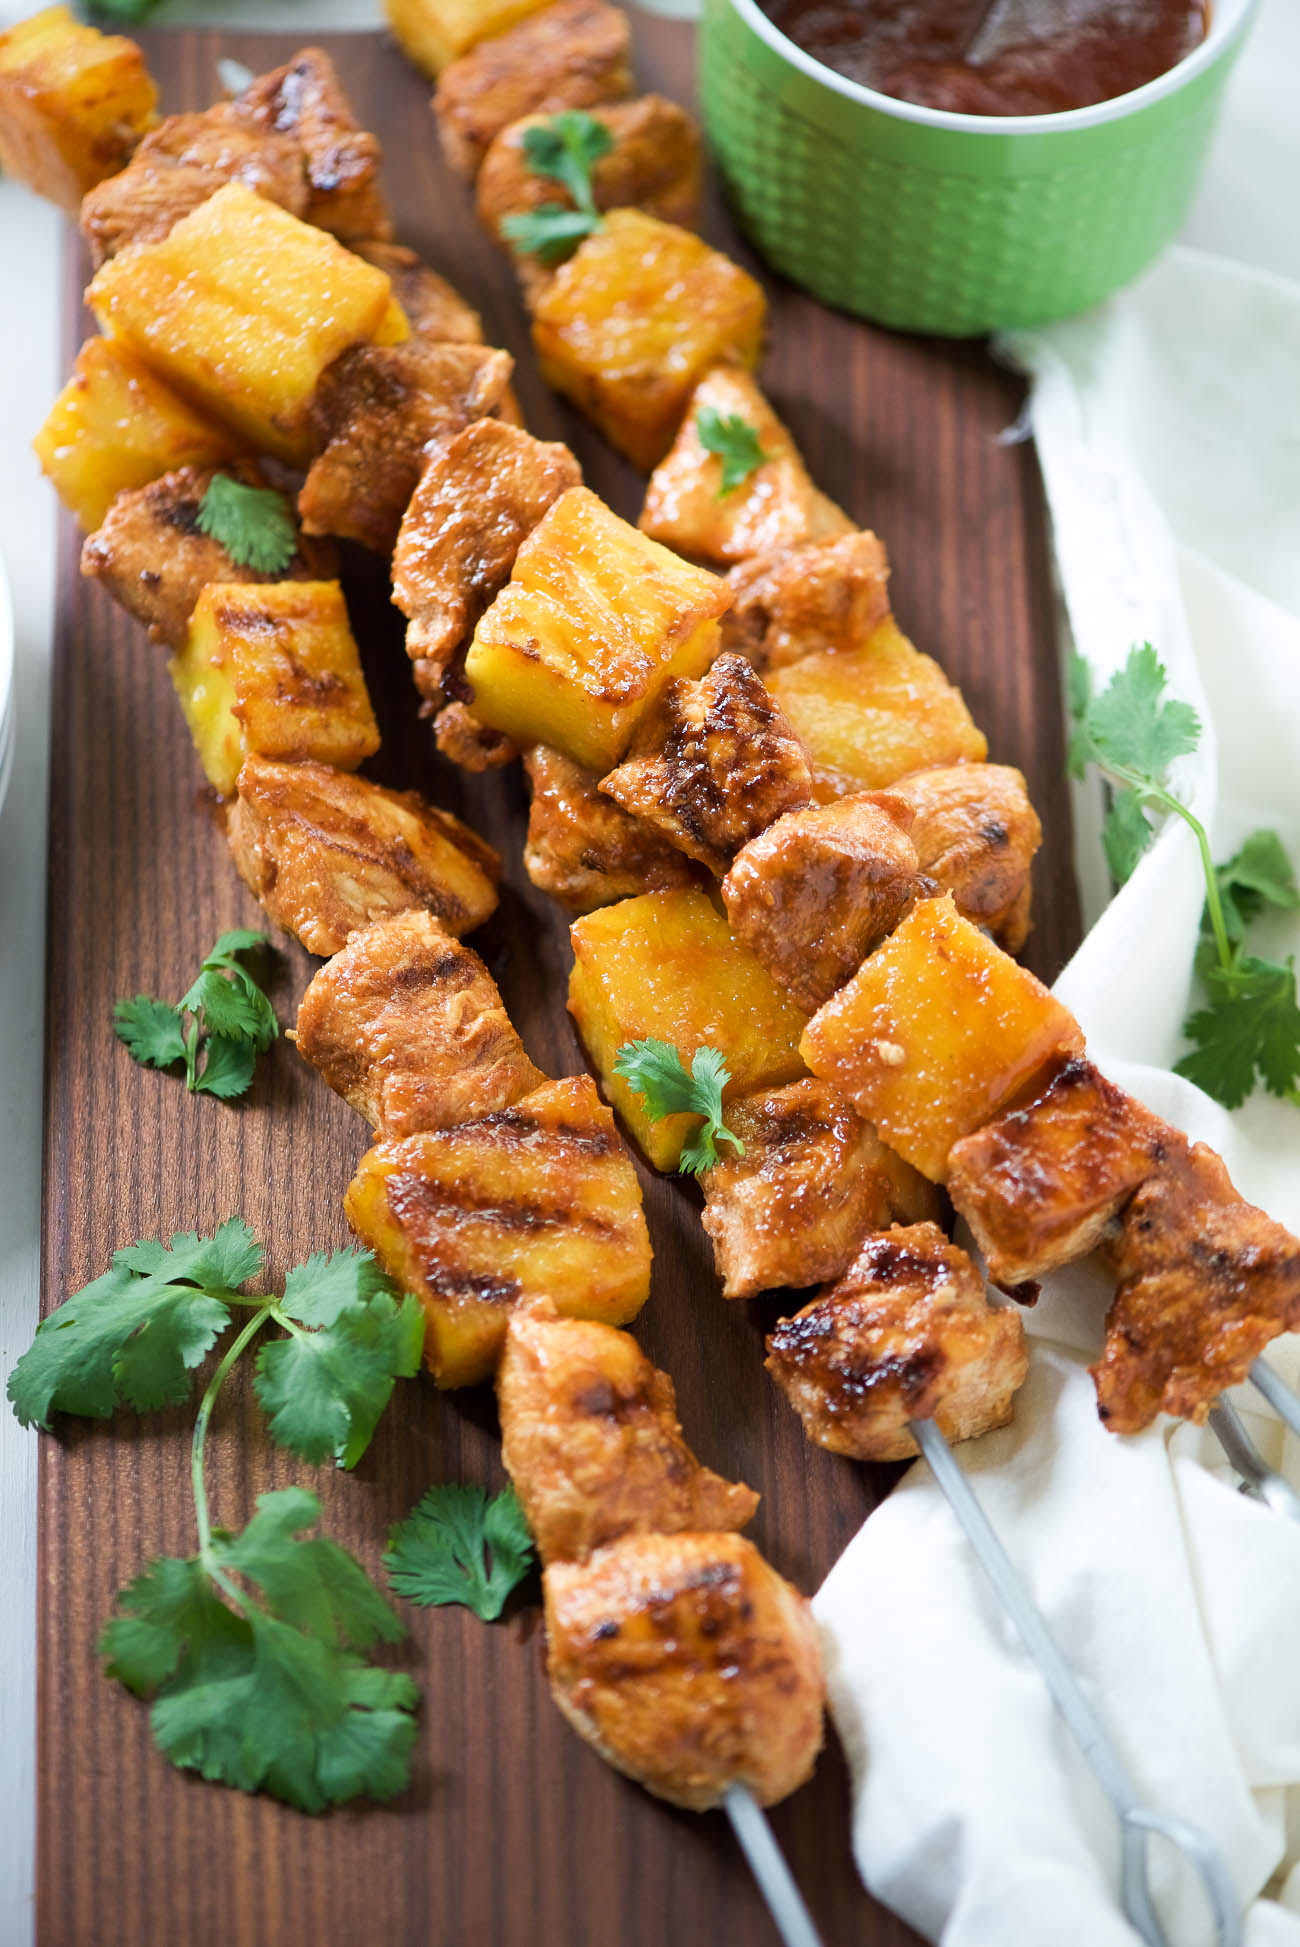 Grilled Huli Huli Chicken Kabobs - Juicy pineapple and tender chicken coated in a sweet and savory glaze then grilled to perfection! The perfect summertime, quick dinner!